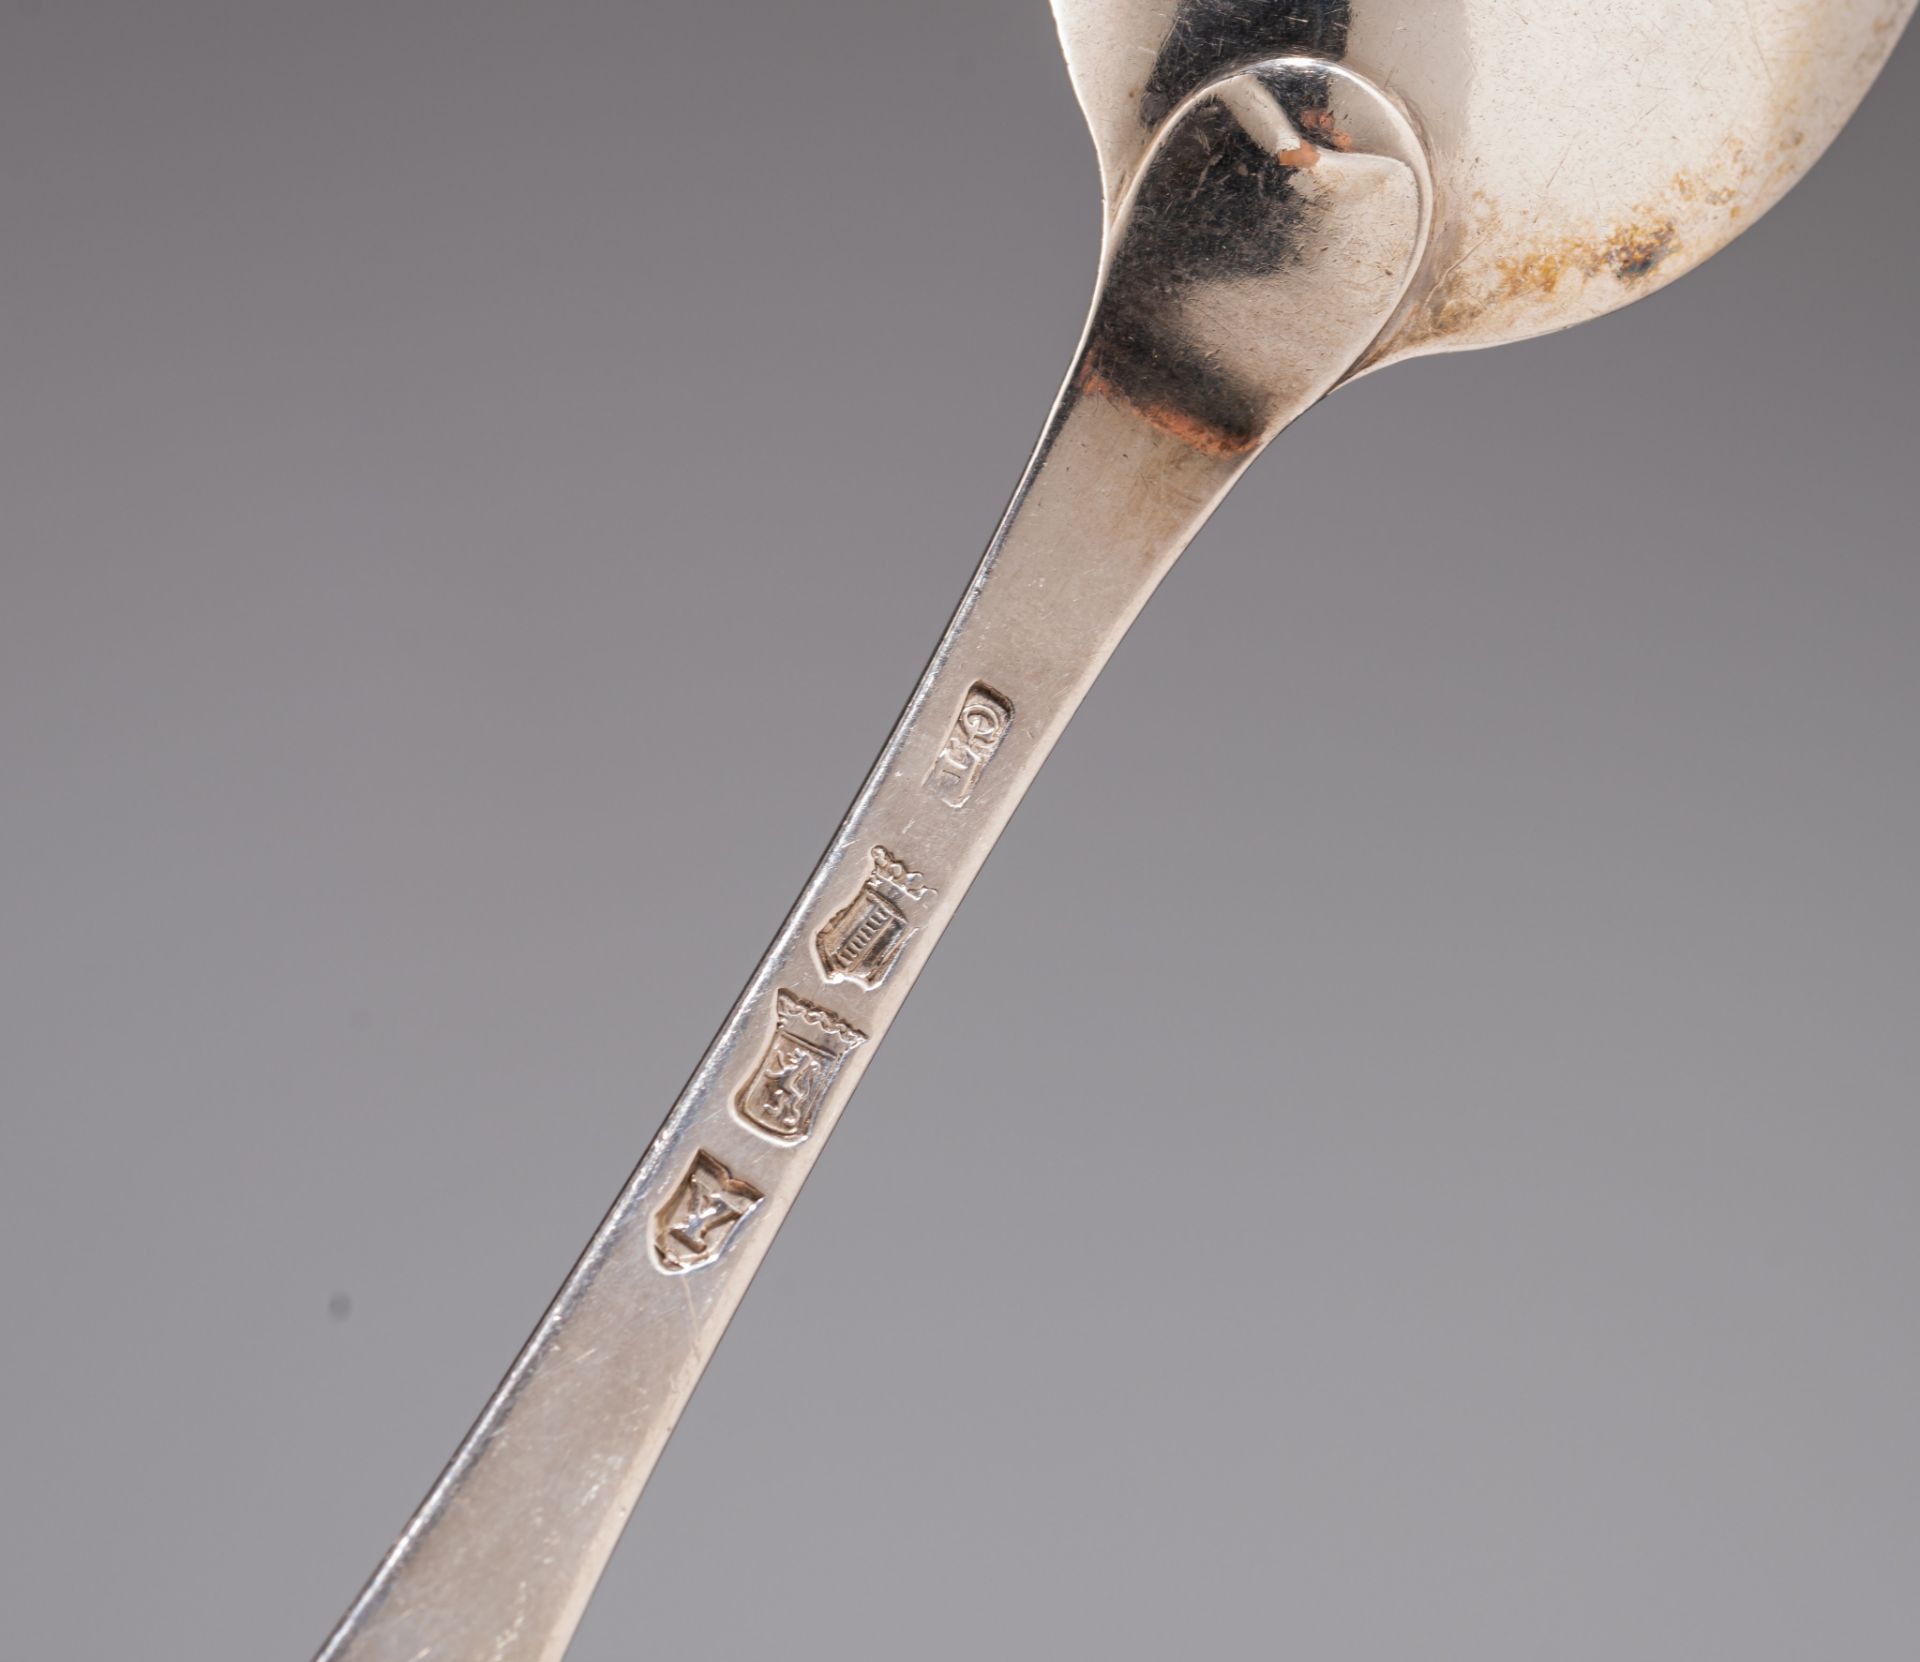 A set of 12 18thC forks and spoons, Delft hallmarks, date letter Y (1776), total weight: 1.387 g - Bild 2 aus 2